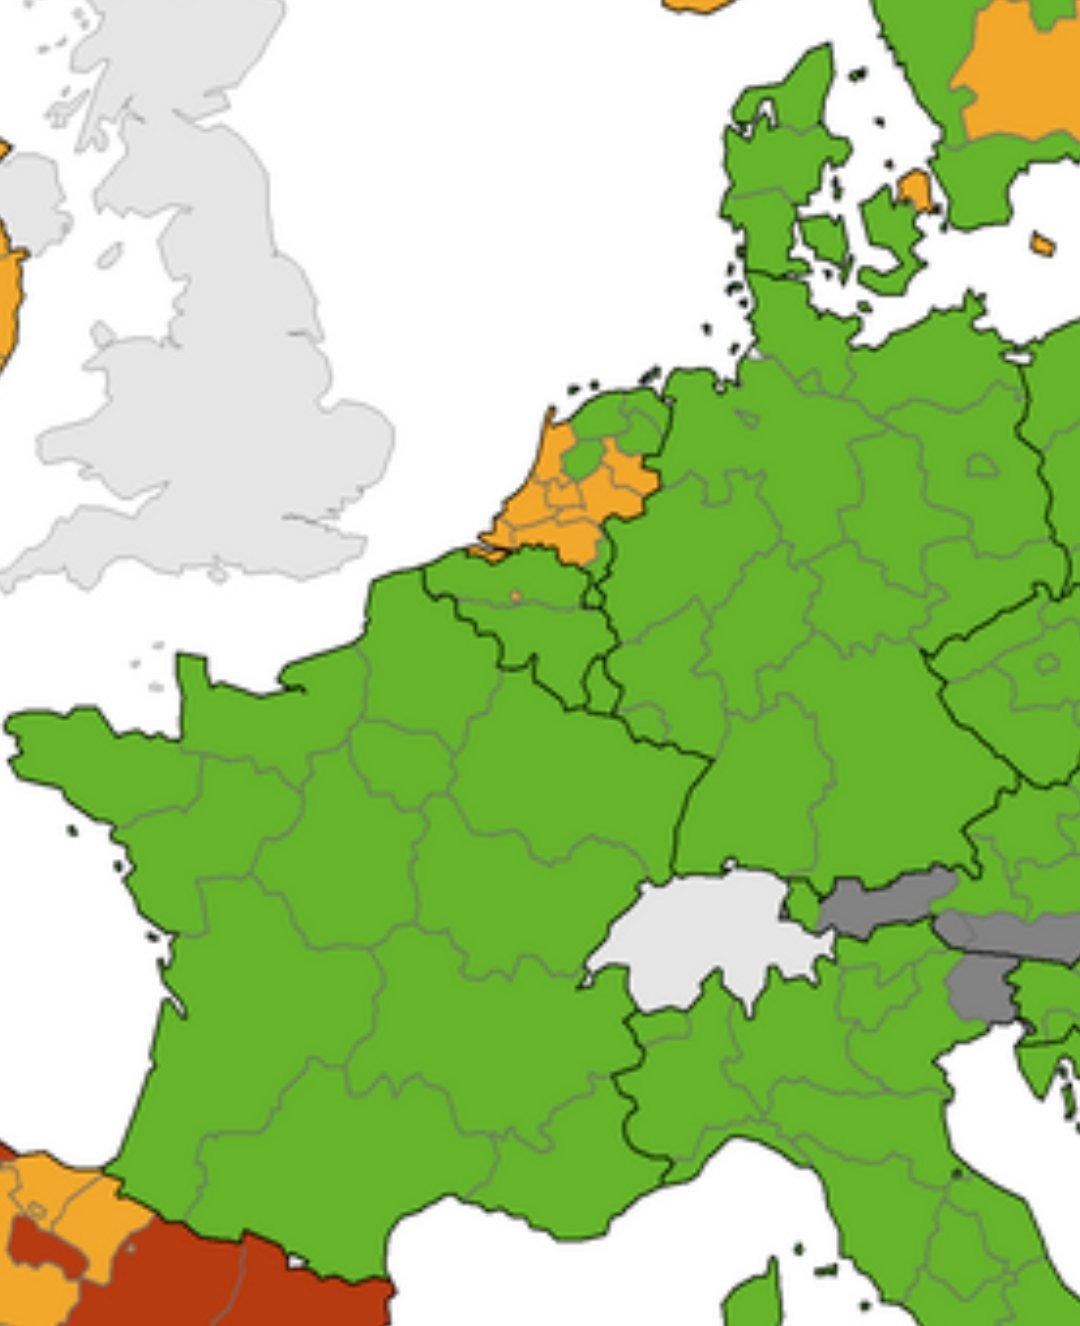 Brecht Devleesschauwer On Twitter Update To The Ecdc Eu Covid19 Map Walloon And Flemish Region Now Both Green As It Should Be We Continue Working With Ecdc Eu To Make Sure The Correct